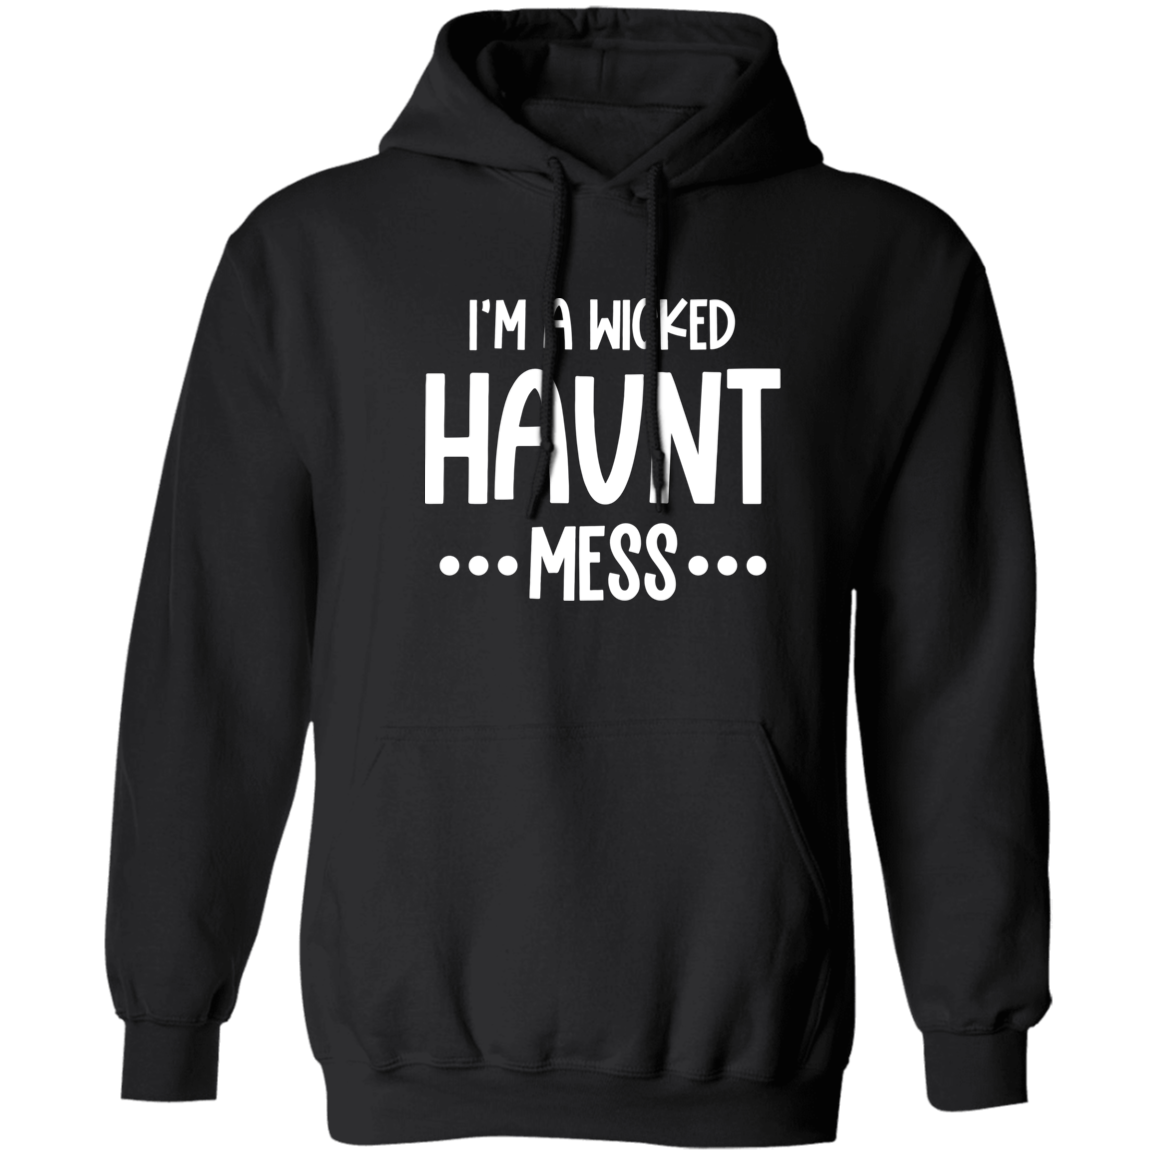 I'm a Wicked HAUNT Mess Pullover Hoodie